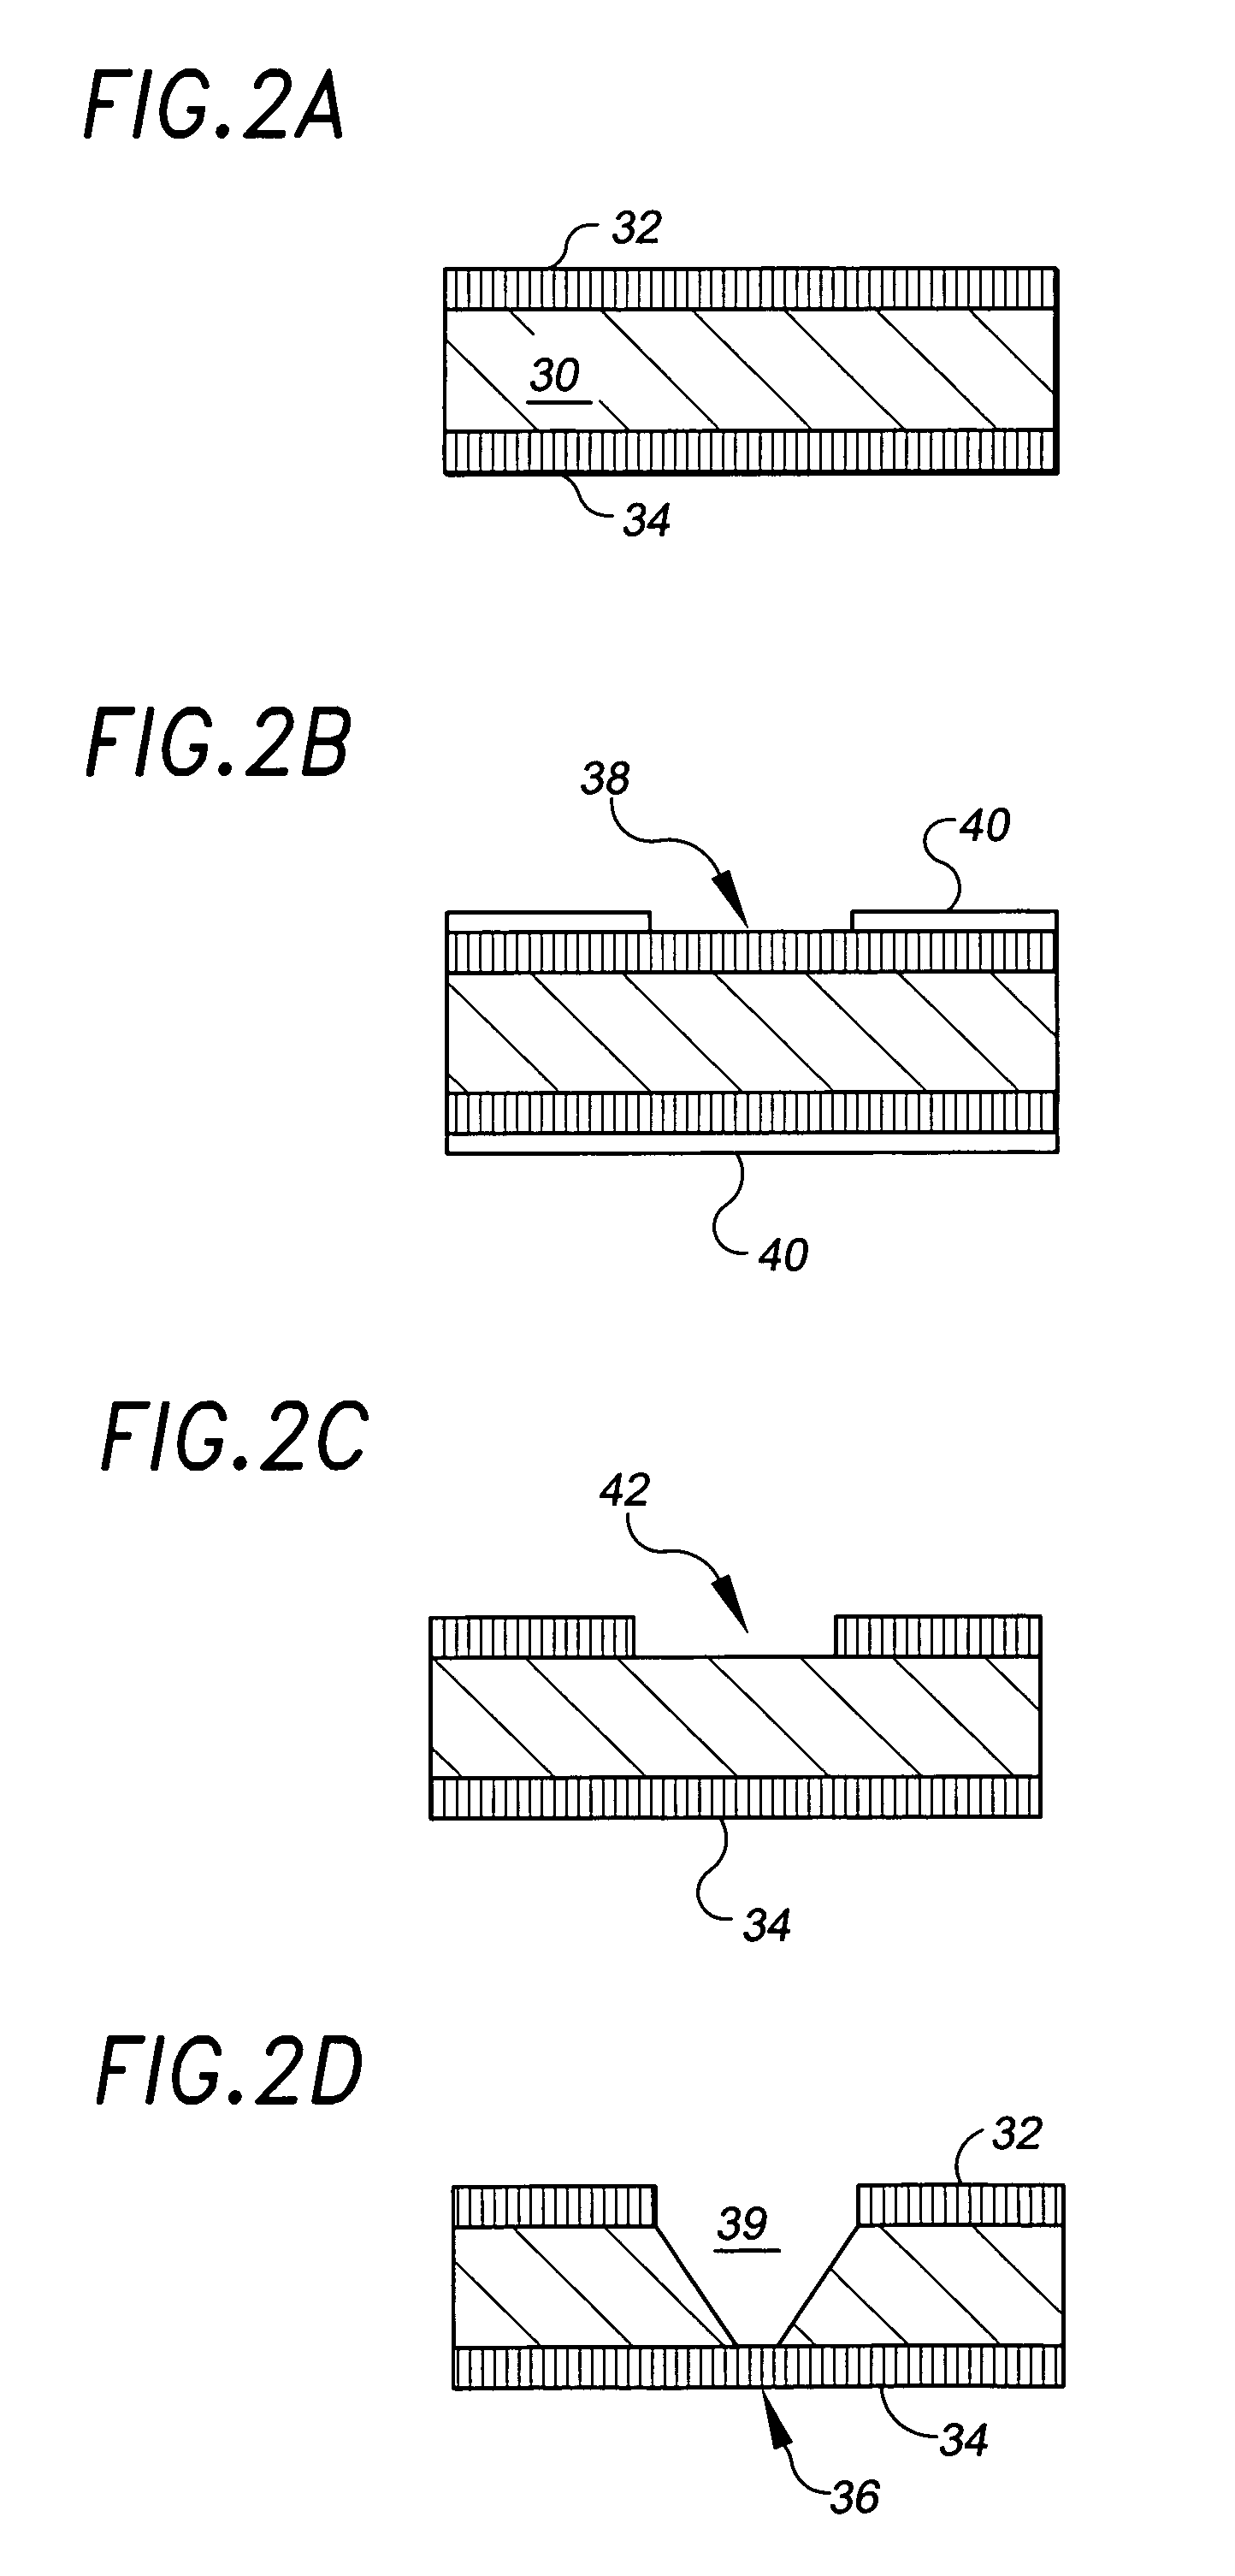 Controlled fabrication of gaps in electrically conducting structures